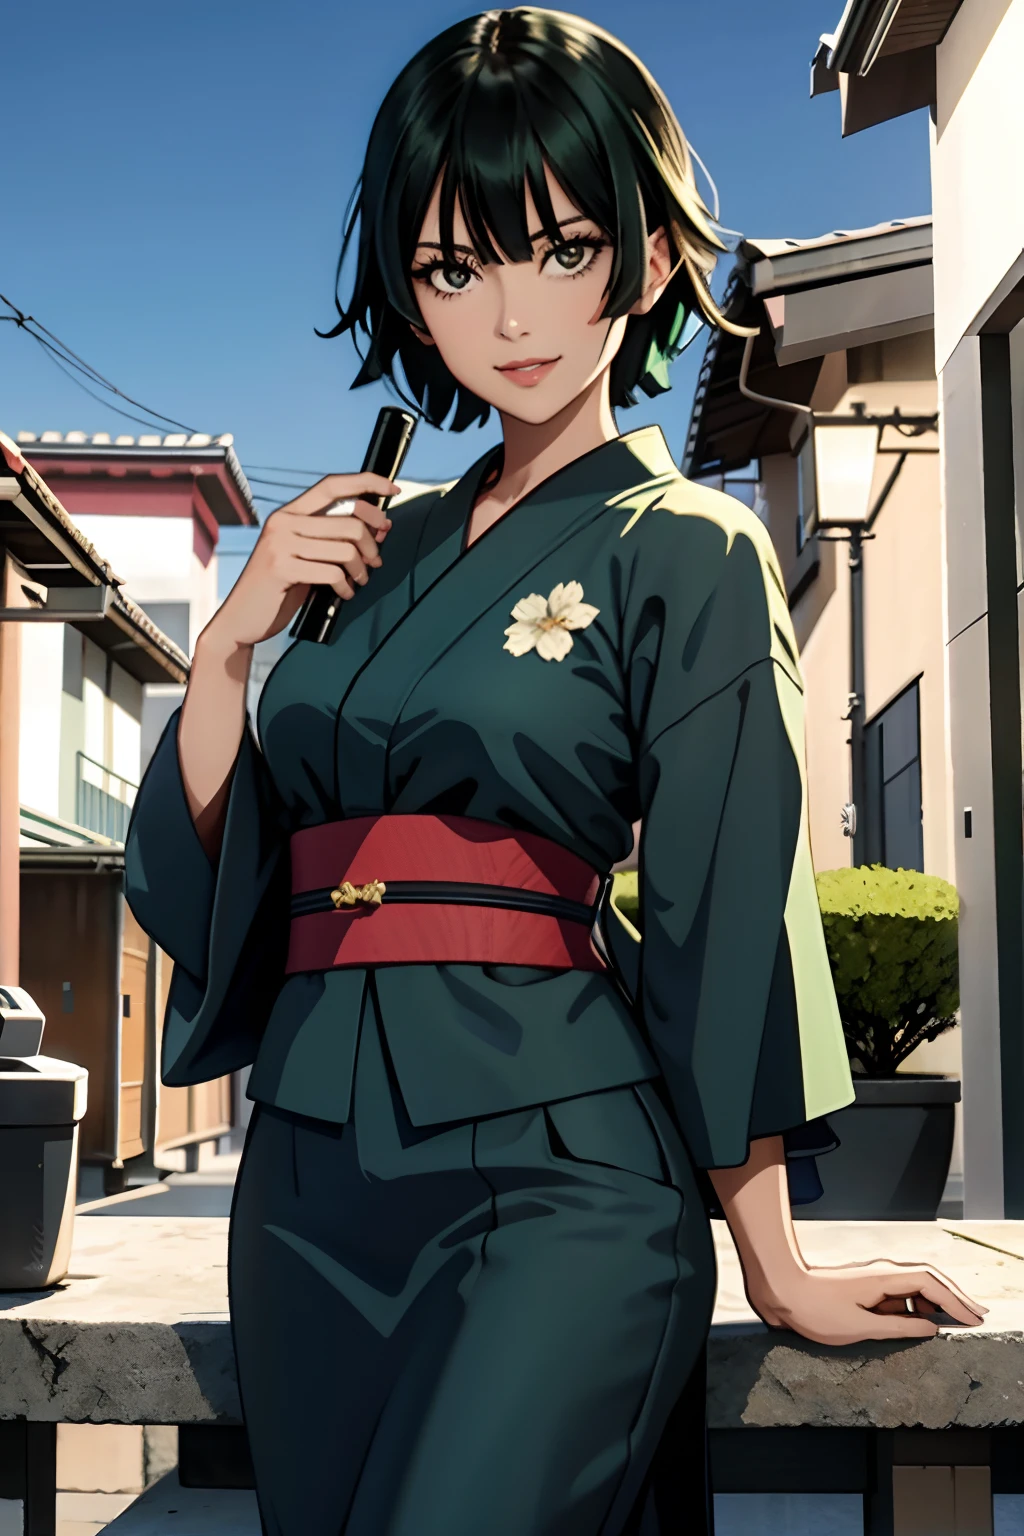 "A girl，Masterpiece level job，Better image quality，in front of camera，neckline，smile，Sexy servant，looks directly at camera，By the shorts，perfect bodies, night background，sitting drinking a glass, inside a room, green hair, kimono。big breasts